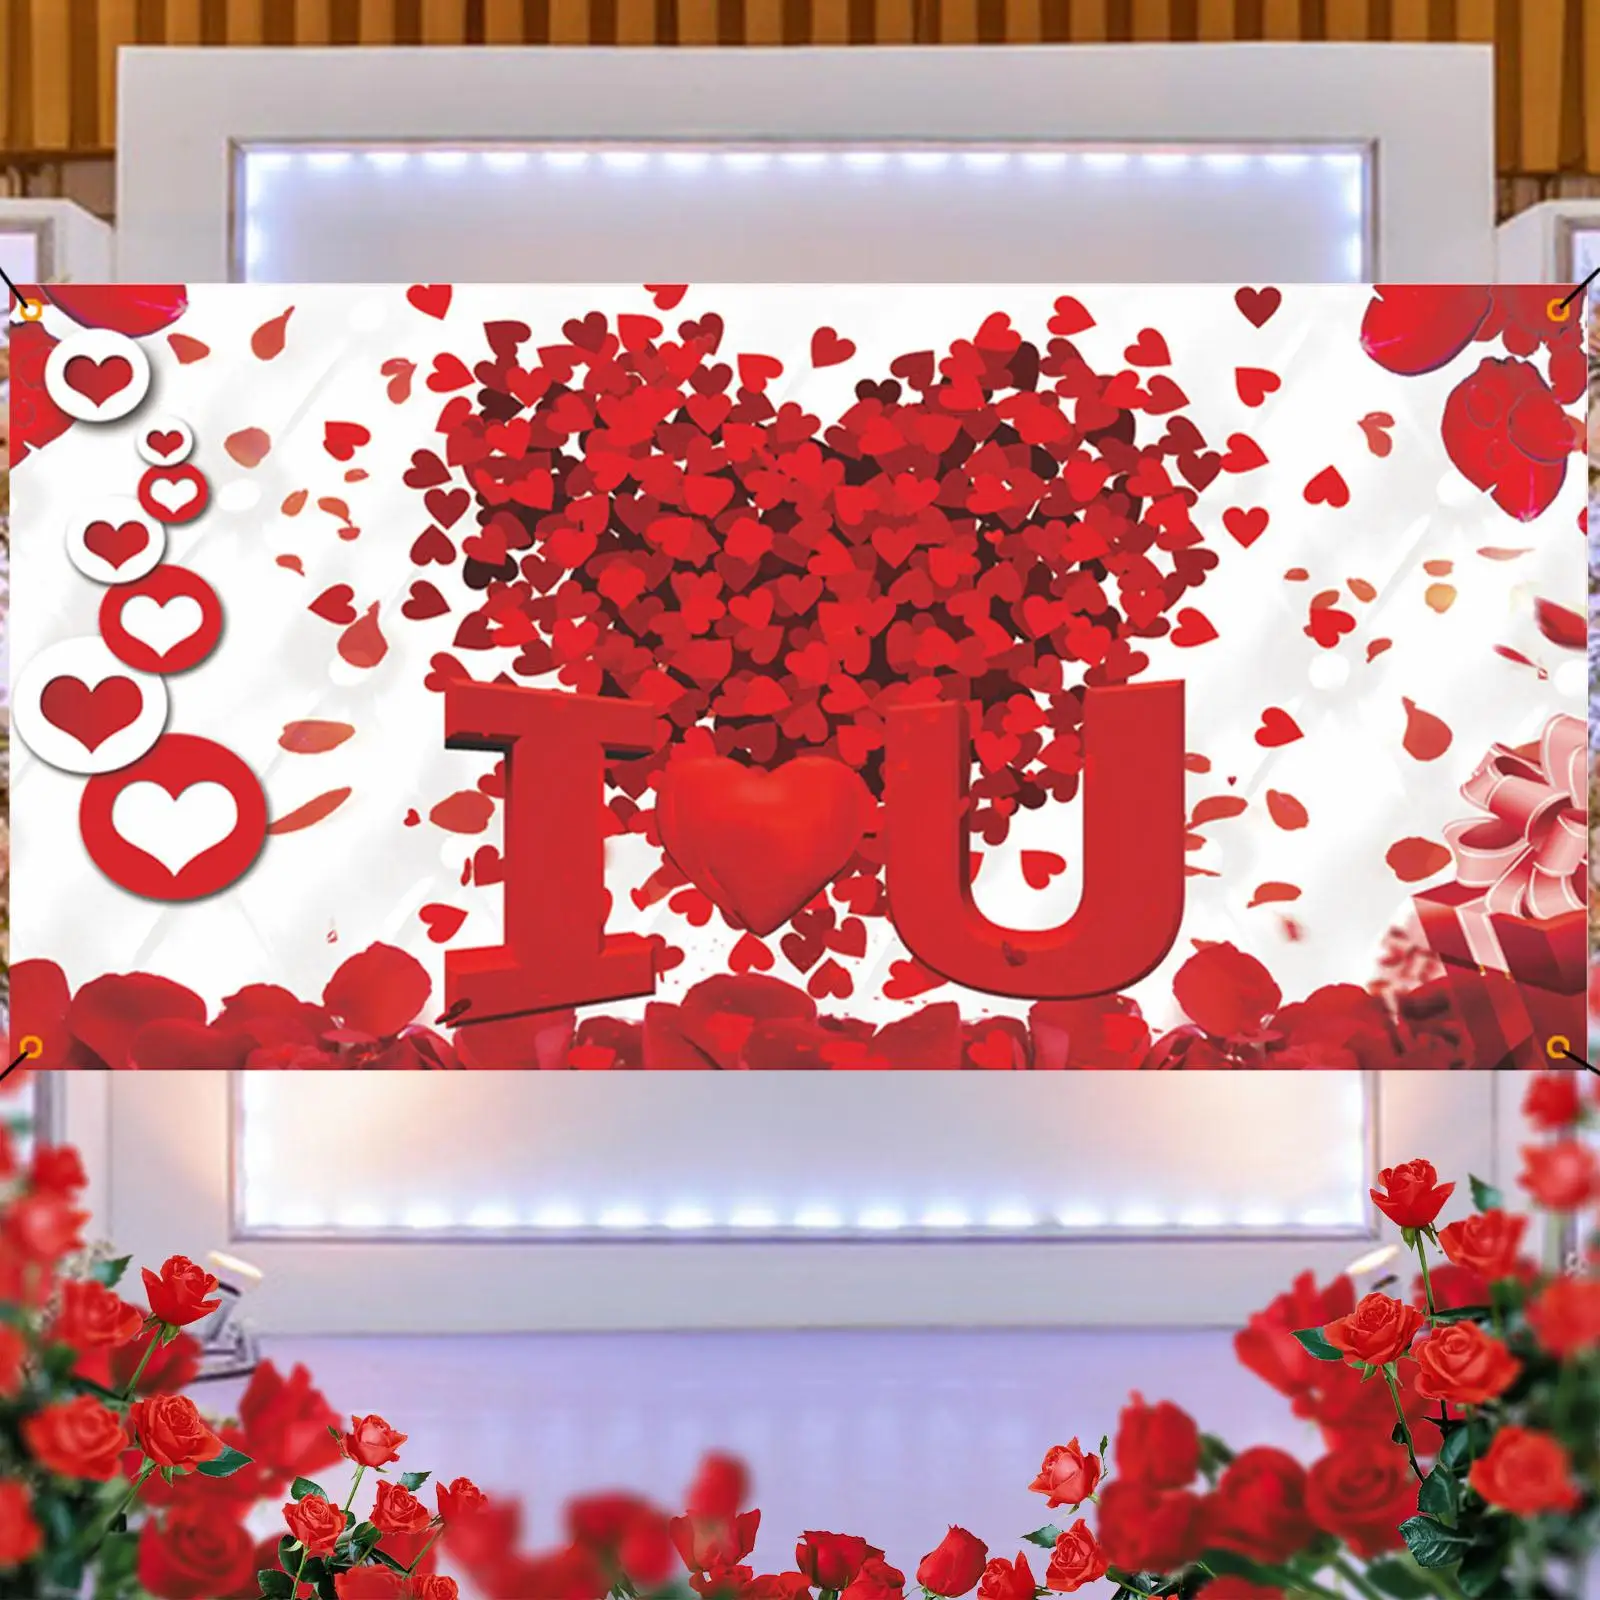 Happy Valentine`s Day Backdrop Banner Valentine`s Day Gift Love Heart Background for Photoshoot Bedroom Party Birthday Wedding